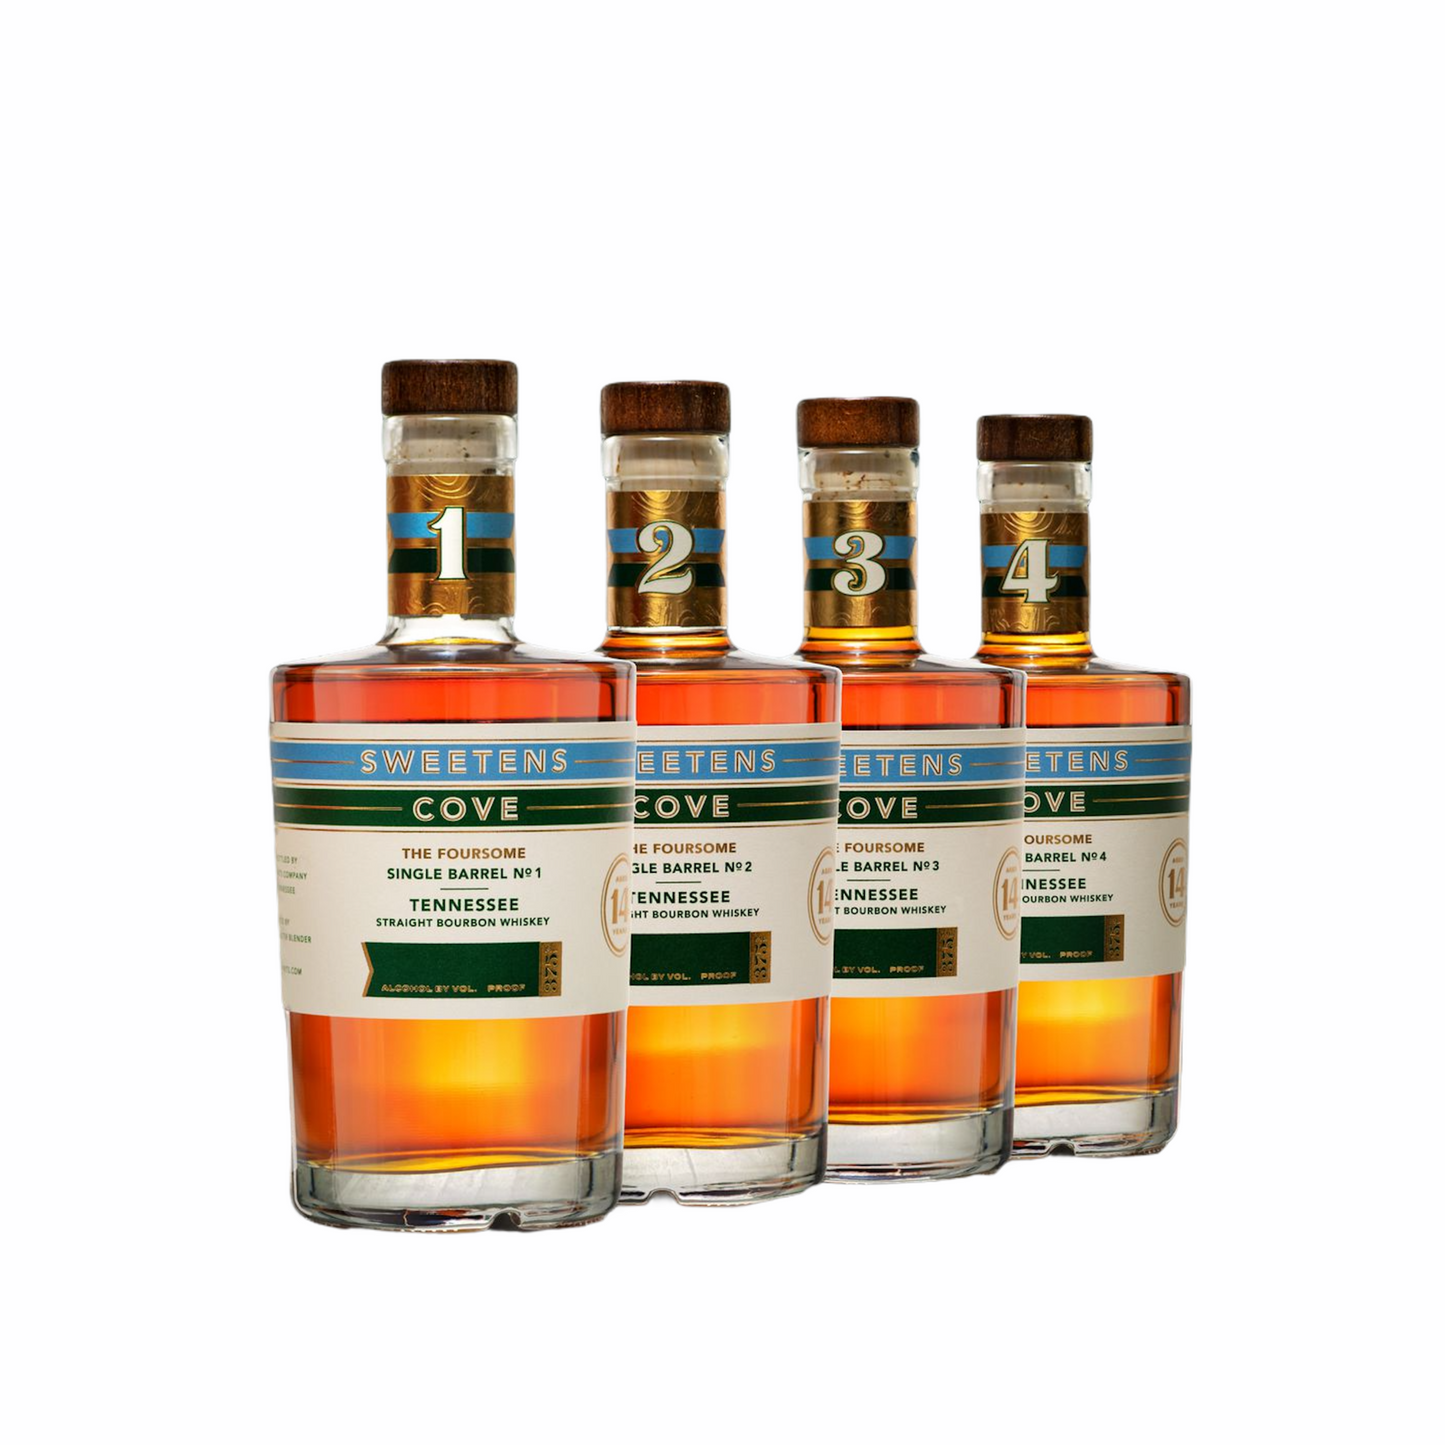 Sweetens Cove The Foursome Single Barrel 14 Year Old Straight Bourbon Whiskey 375ml SET 4 PICK